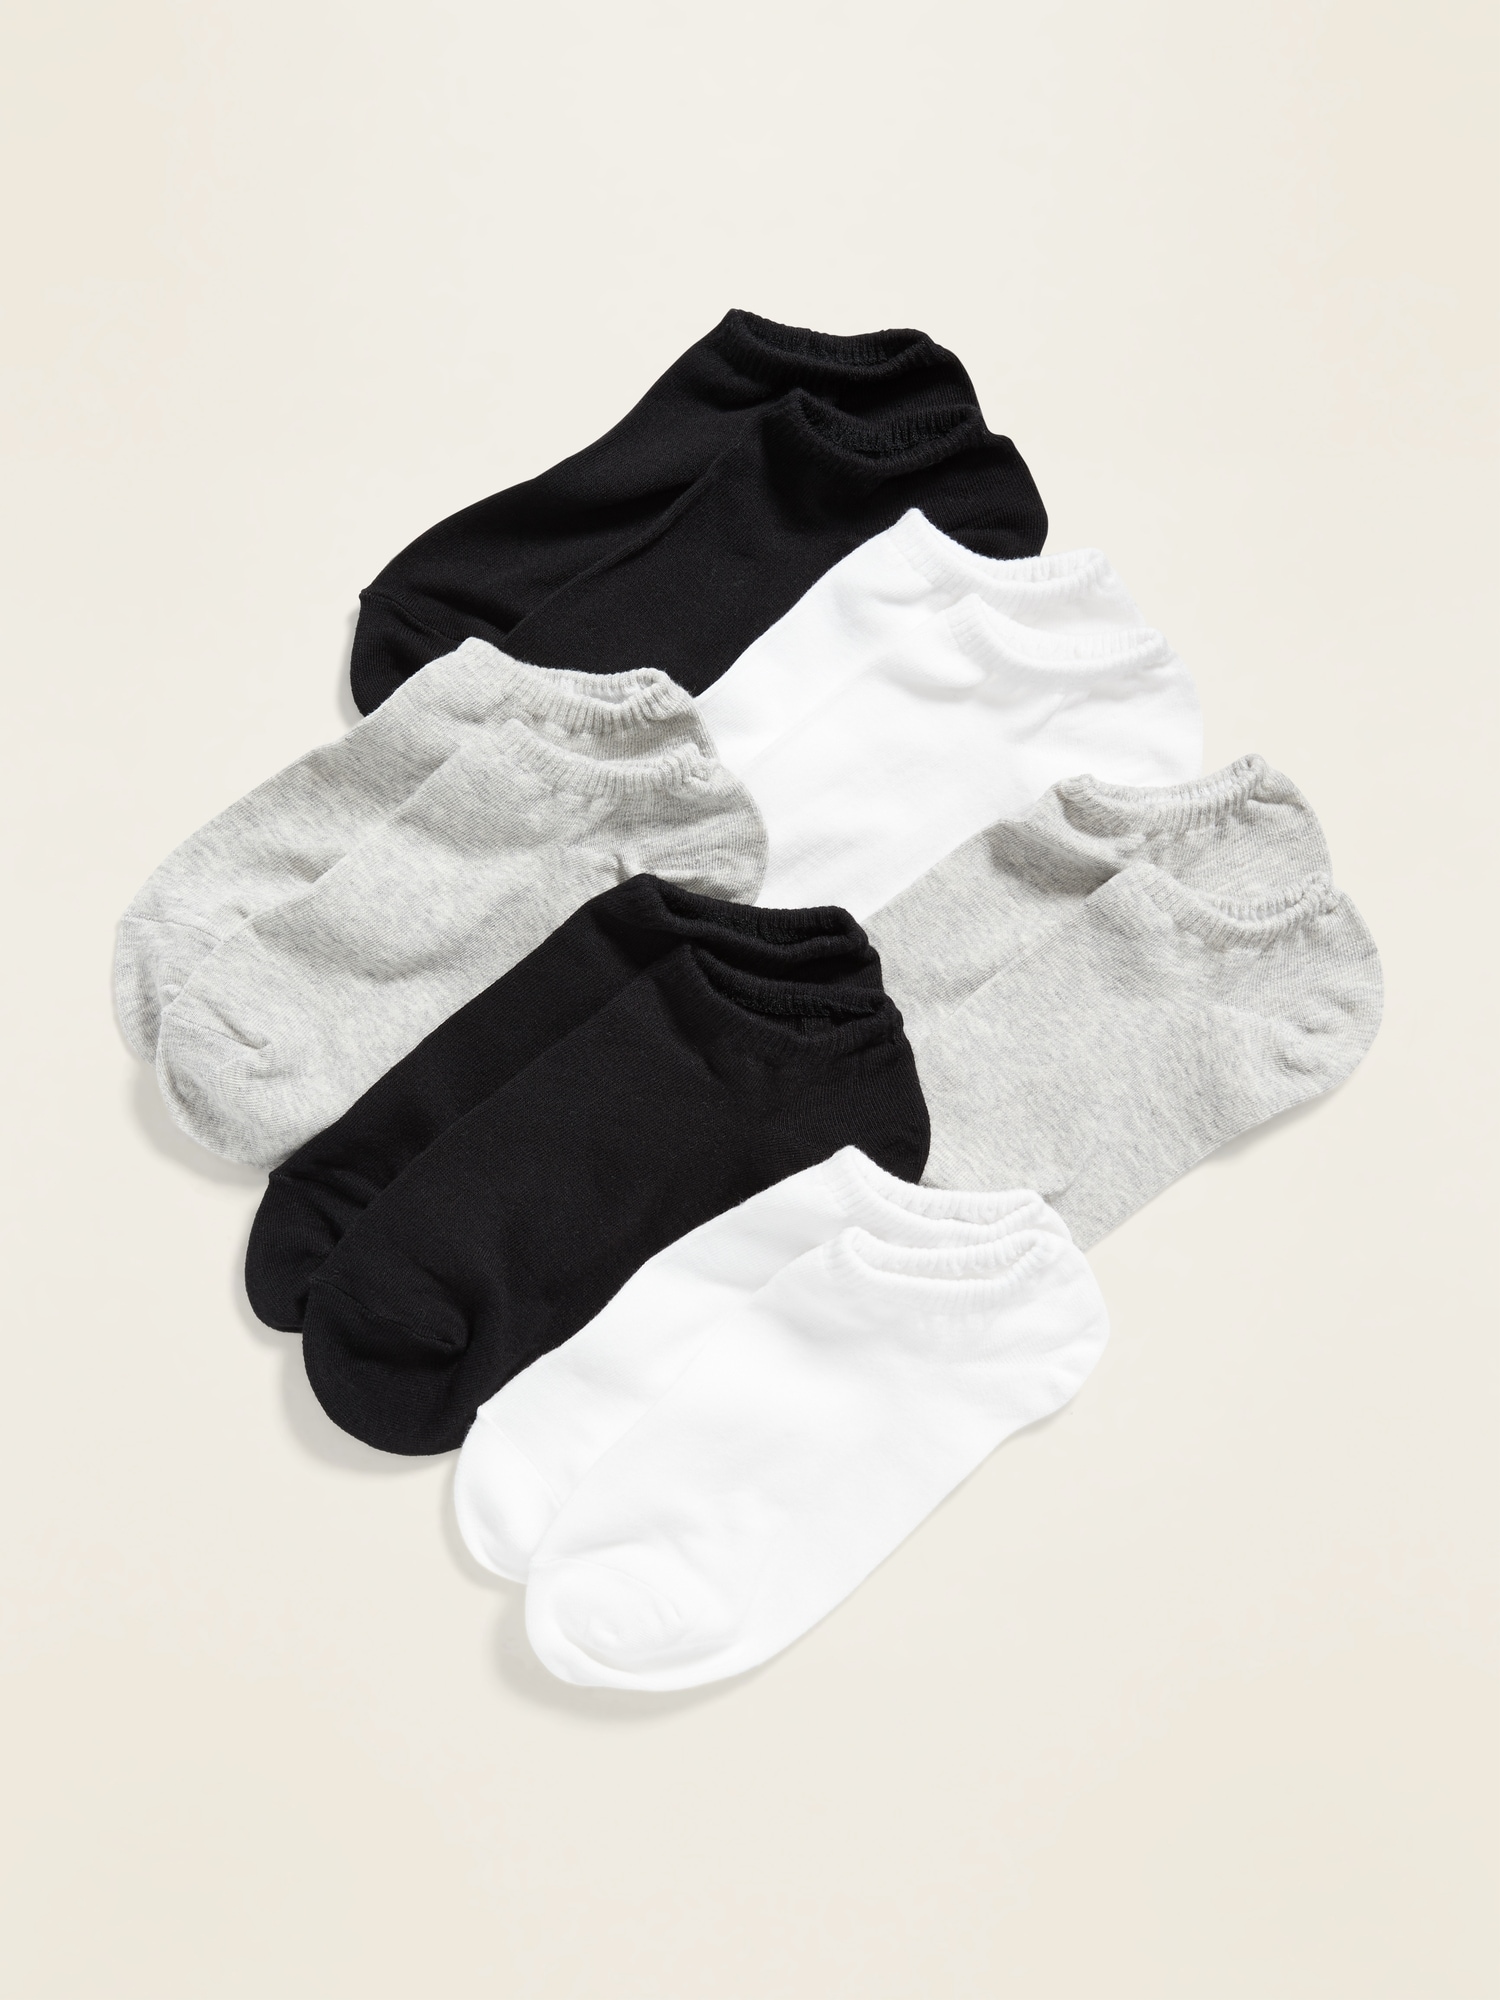 Shop Women's White Toe Socks for Comfy Toes